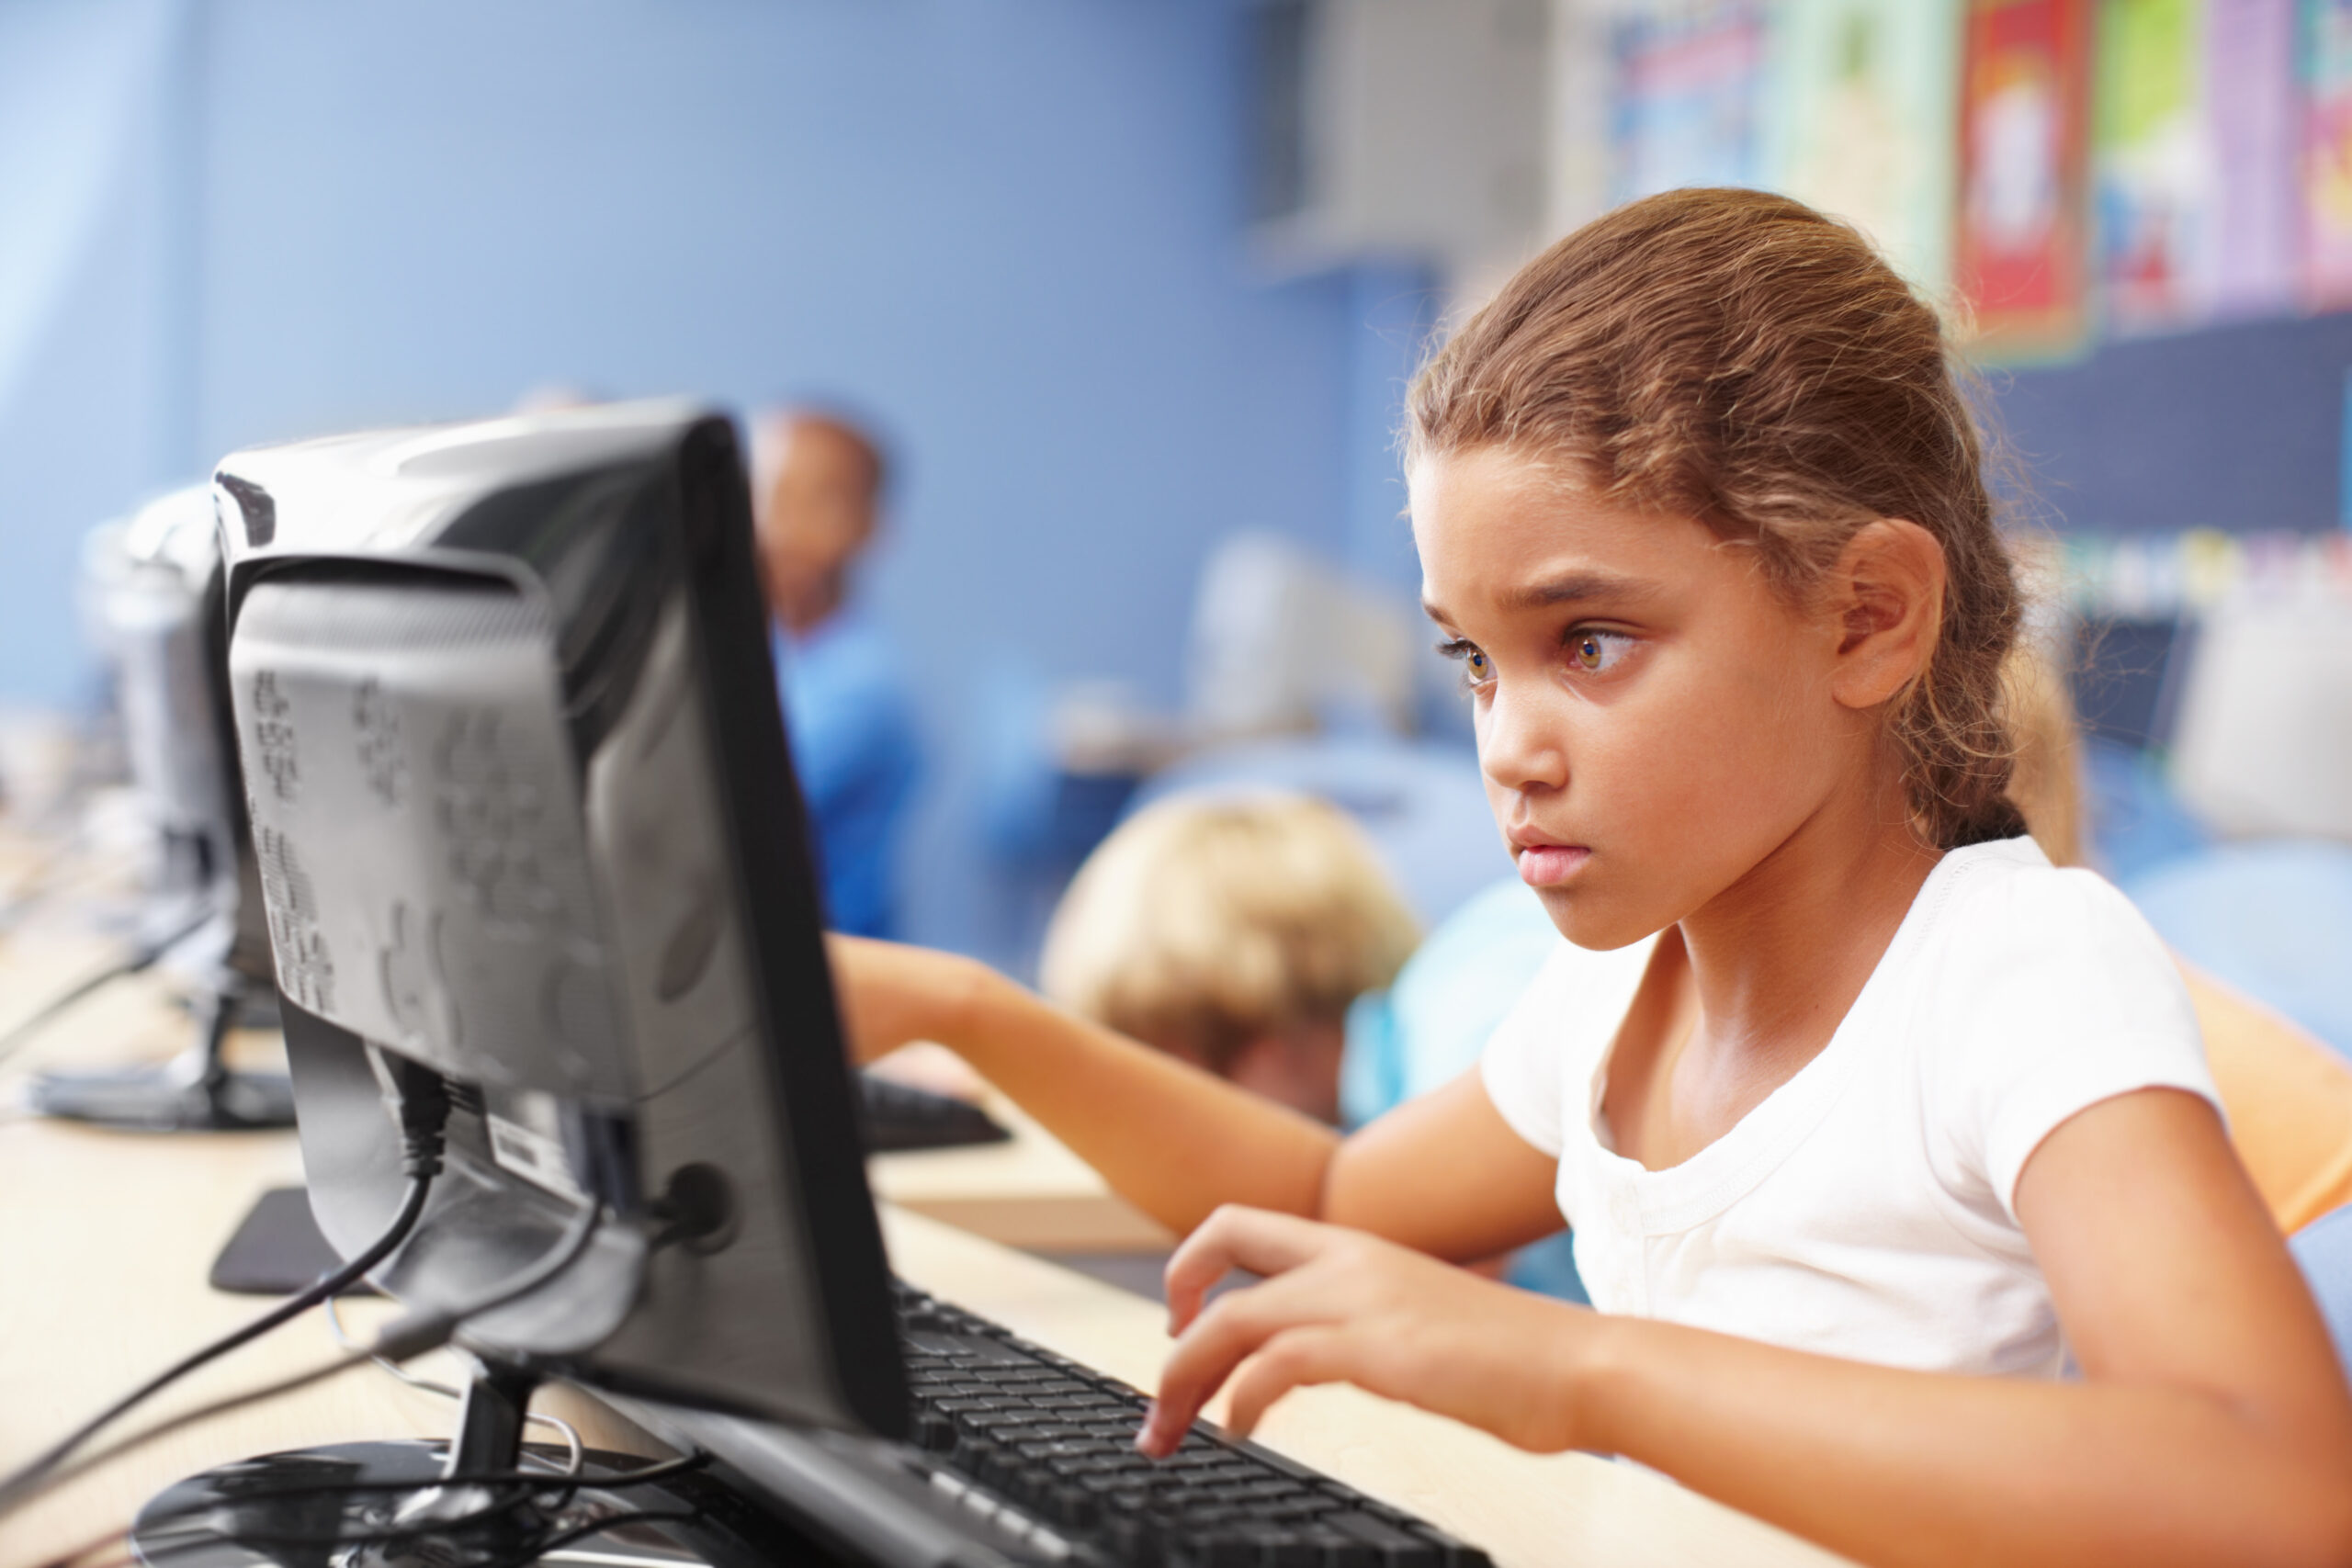 Young schoolgirl in a classroom sitting at a computer and typing on a keyboard participating in an assessment to measure learning loss.